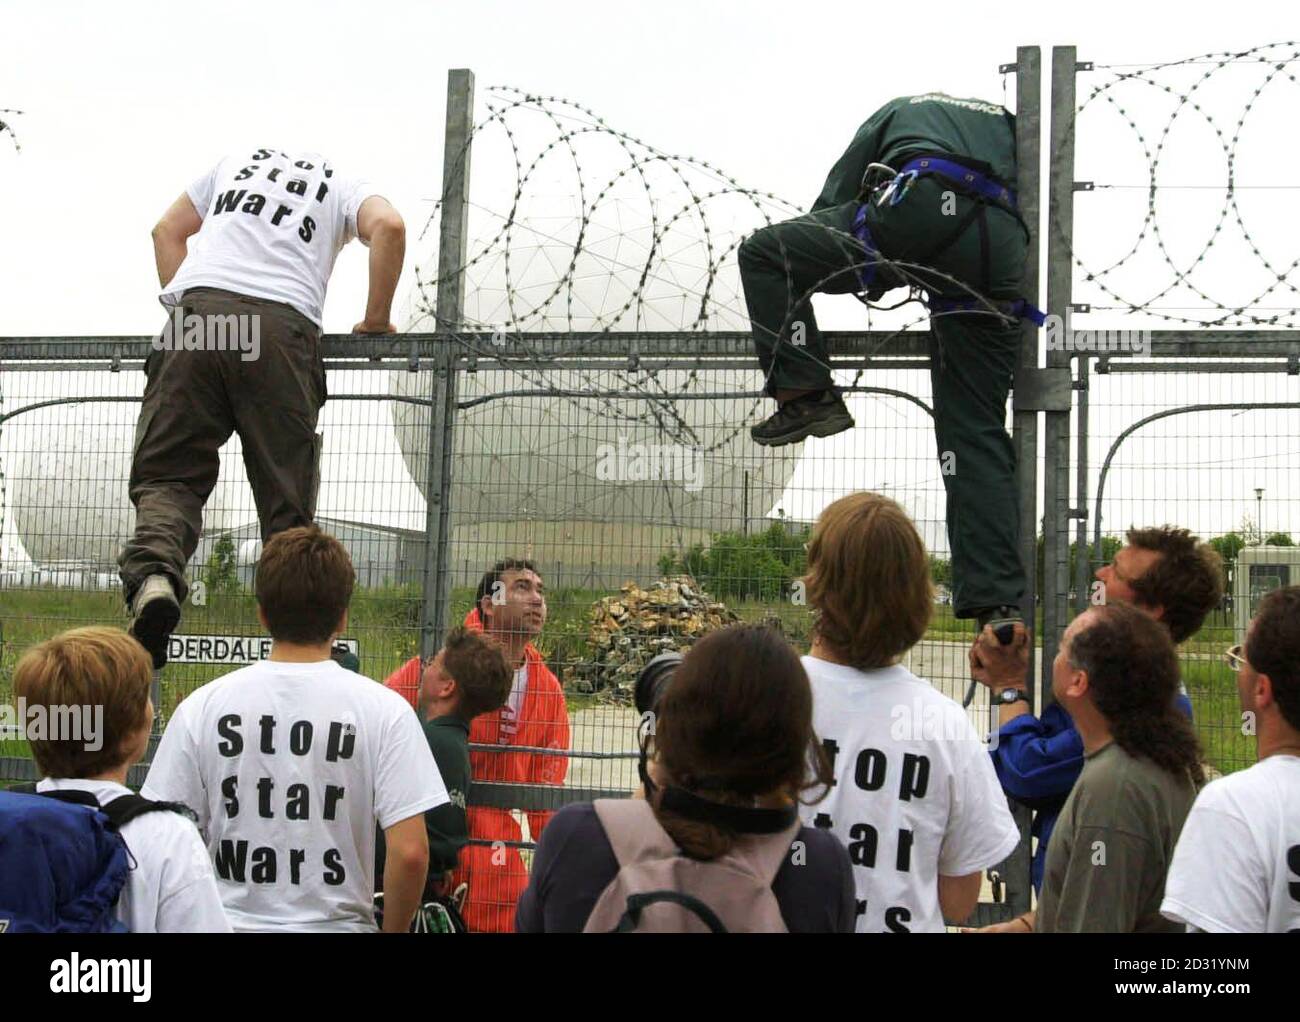 Some of more than 100 peace protesters who broke into major British defence site Menwith Hill Base, near Harrogate, scaling the perimeter fence. Greenpeace said its activists entered the spy base to protest against US plans to use it as part of its Son of Star Wars. * ...national missile defence programme. North Yorkshire Police confirmed they were attending an incident at the base but said they could give no further details. Greenpeace said three groups of protesters were occupying three areas within the high security site. It claimed one group of 50 activists, some carrying flags with the Stock Photo